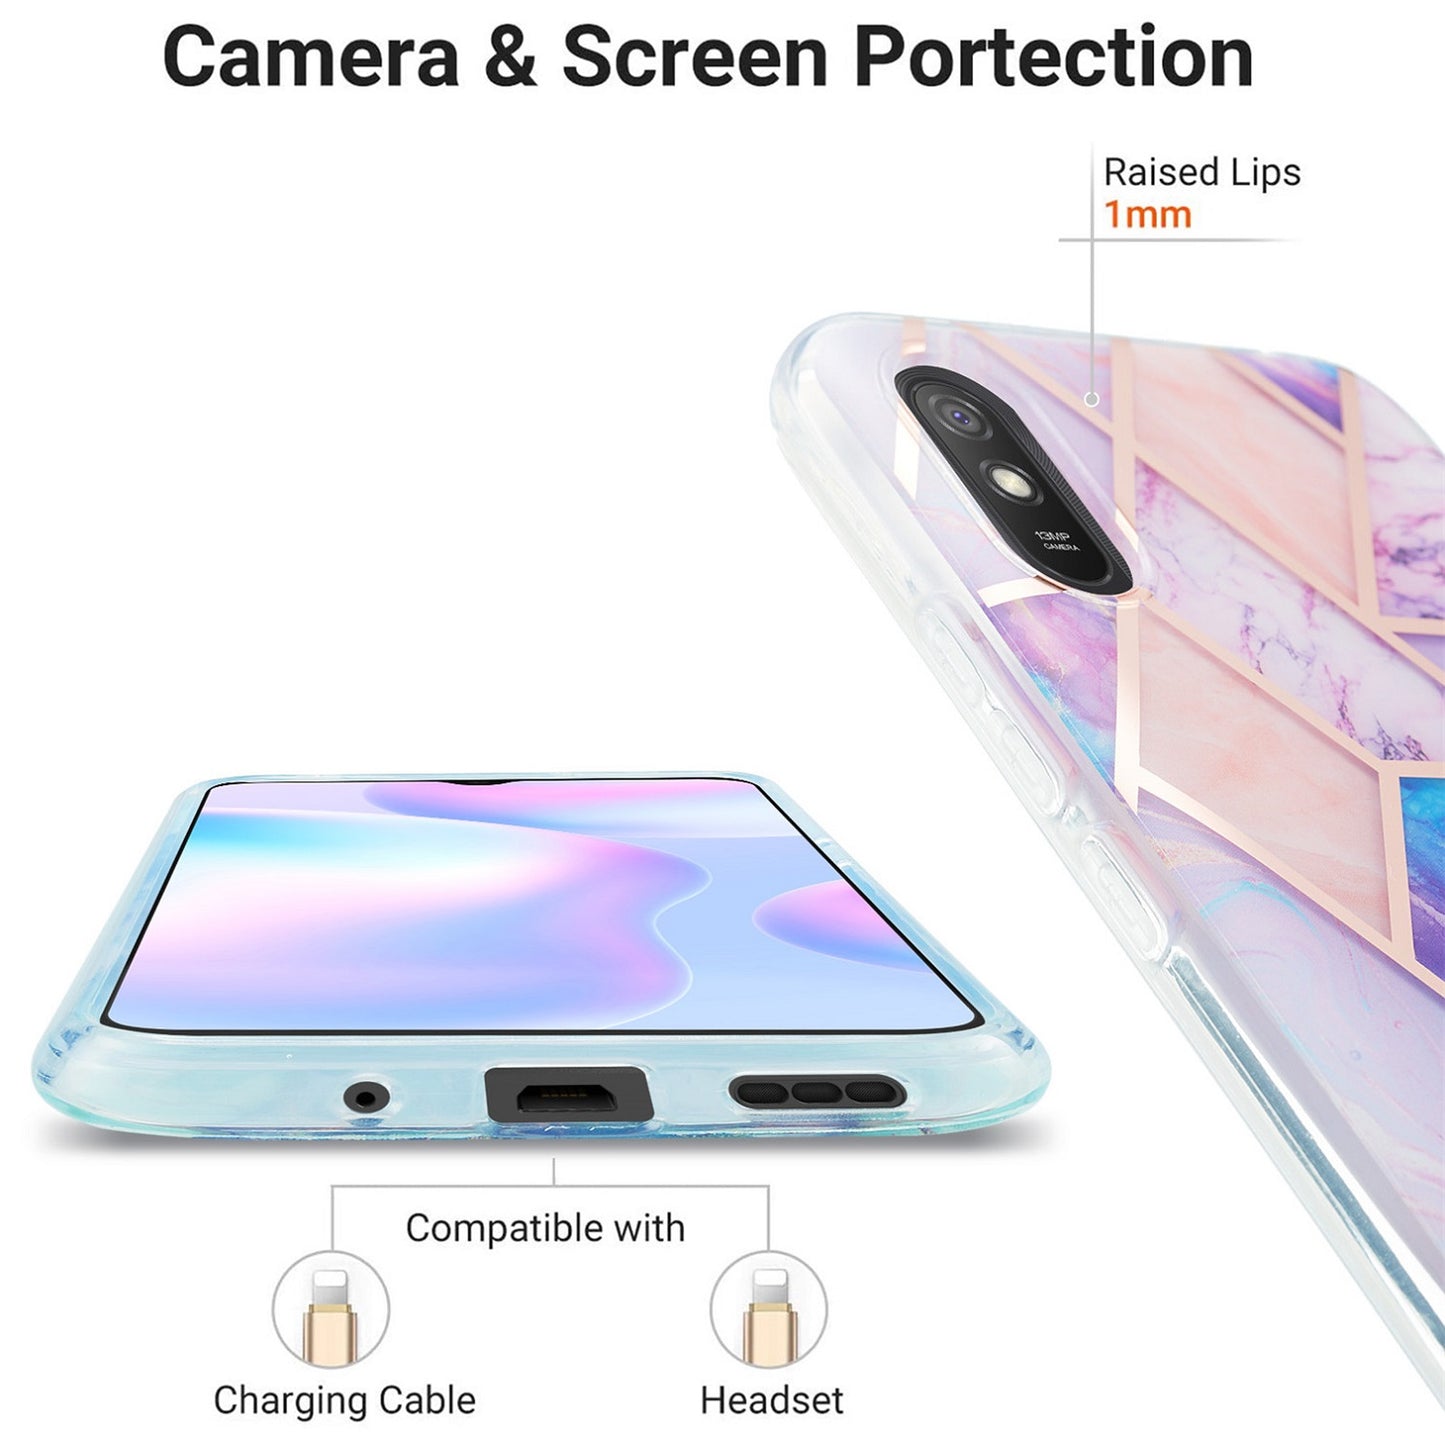 Elegant Redmi 9A back cases and covers (Geo Purple)